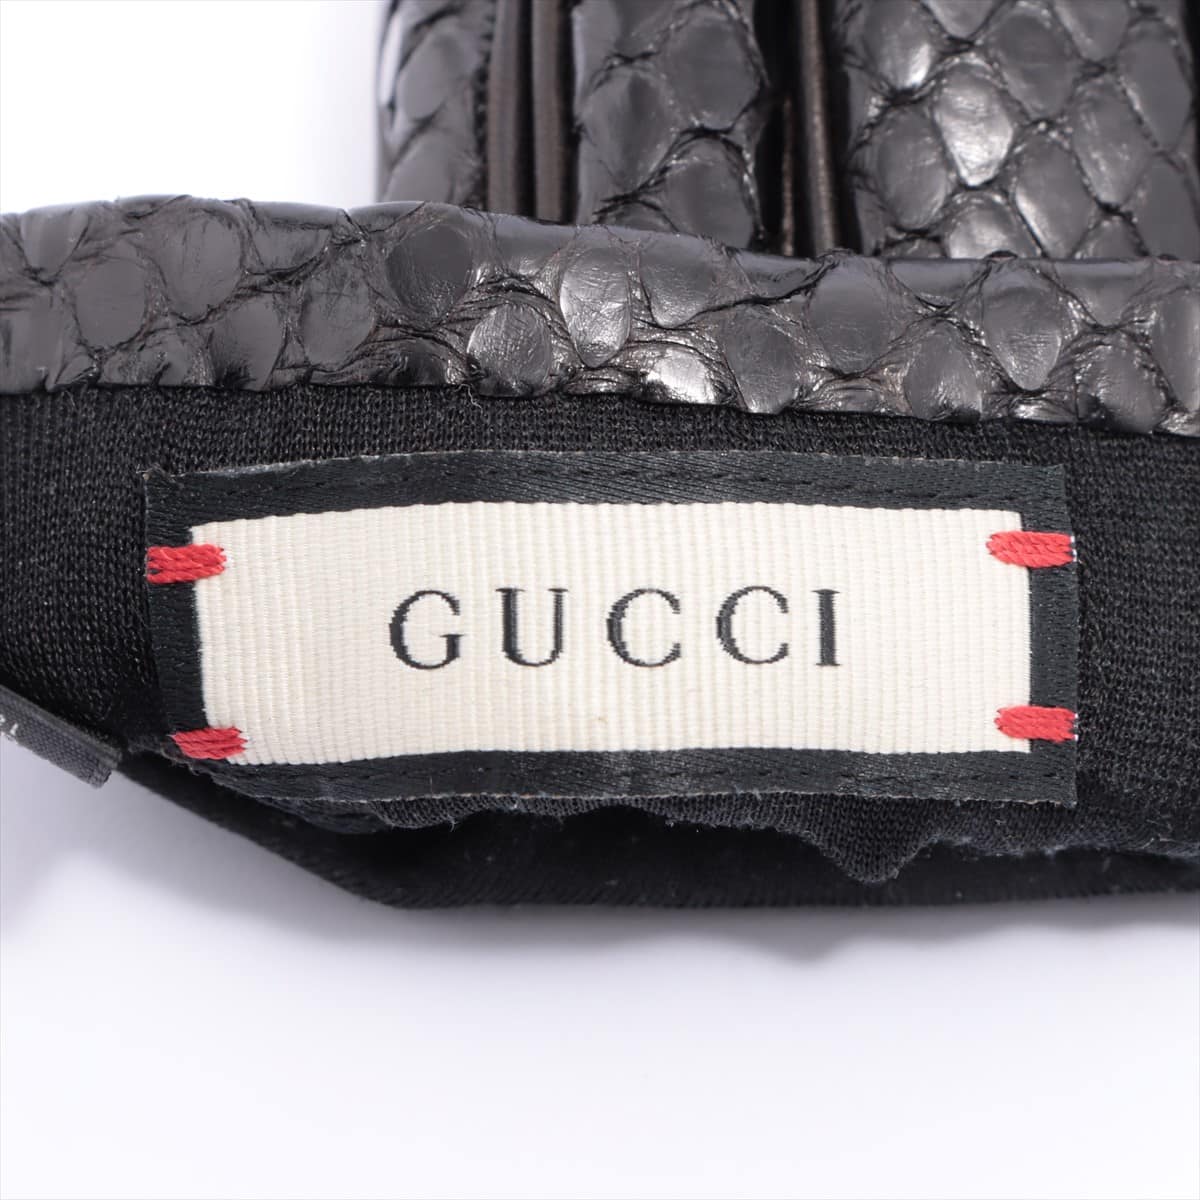 Gucci Grove Snake leather Black